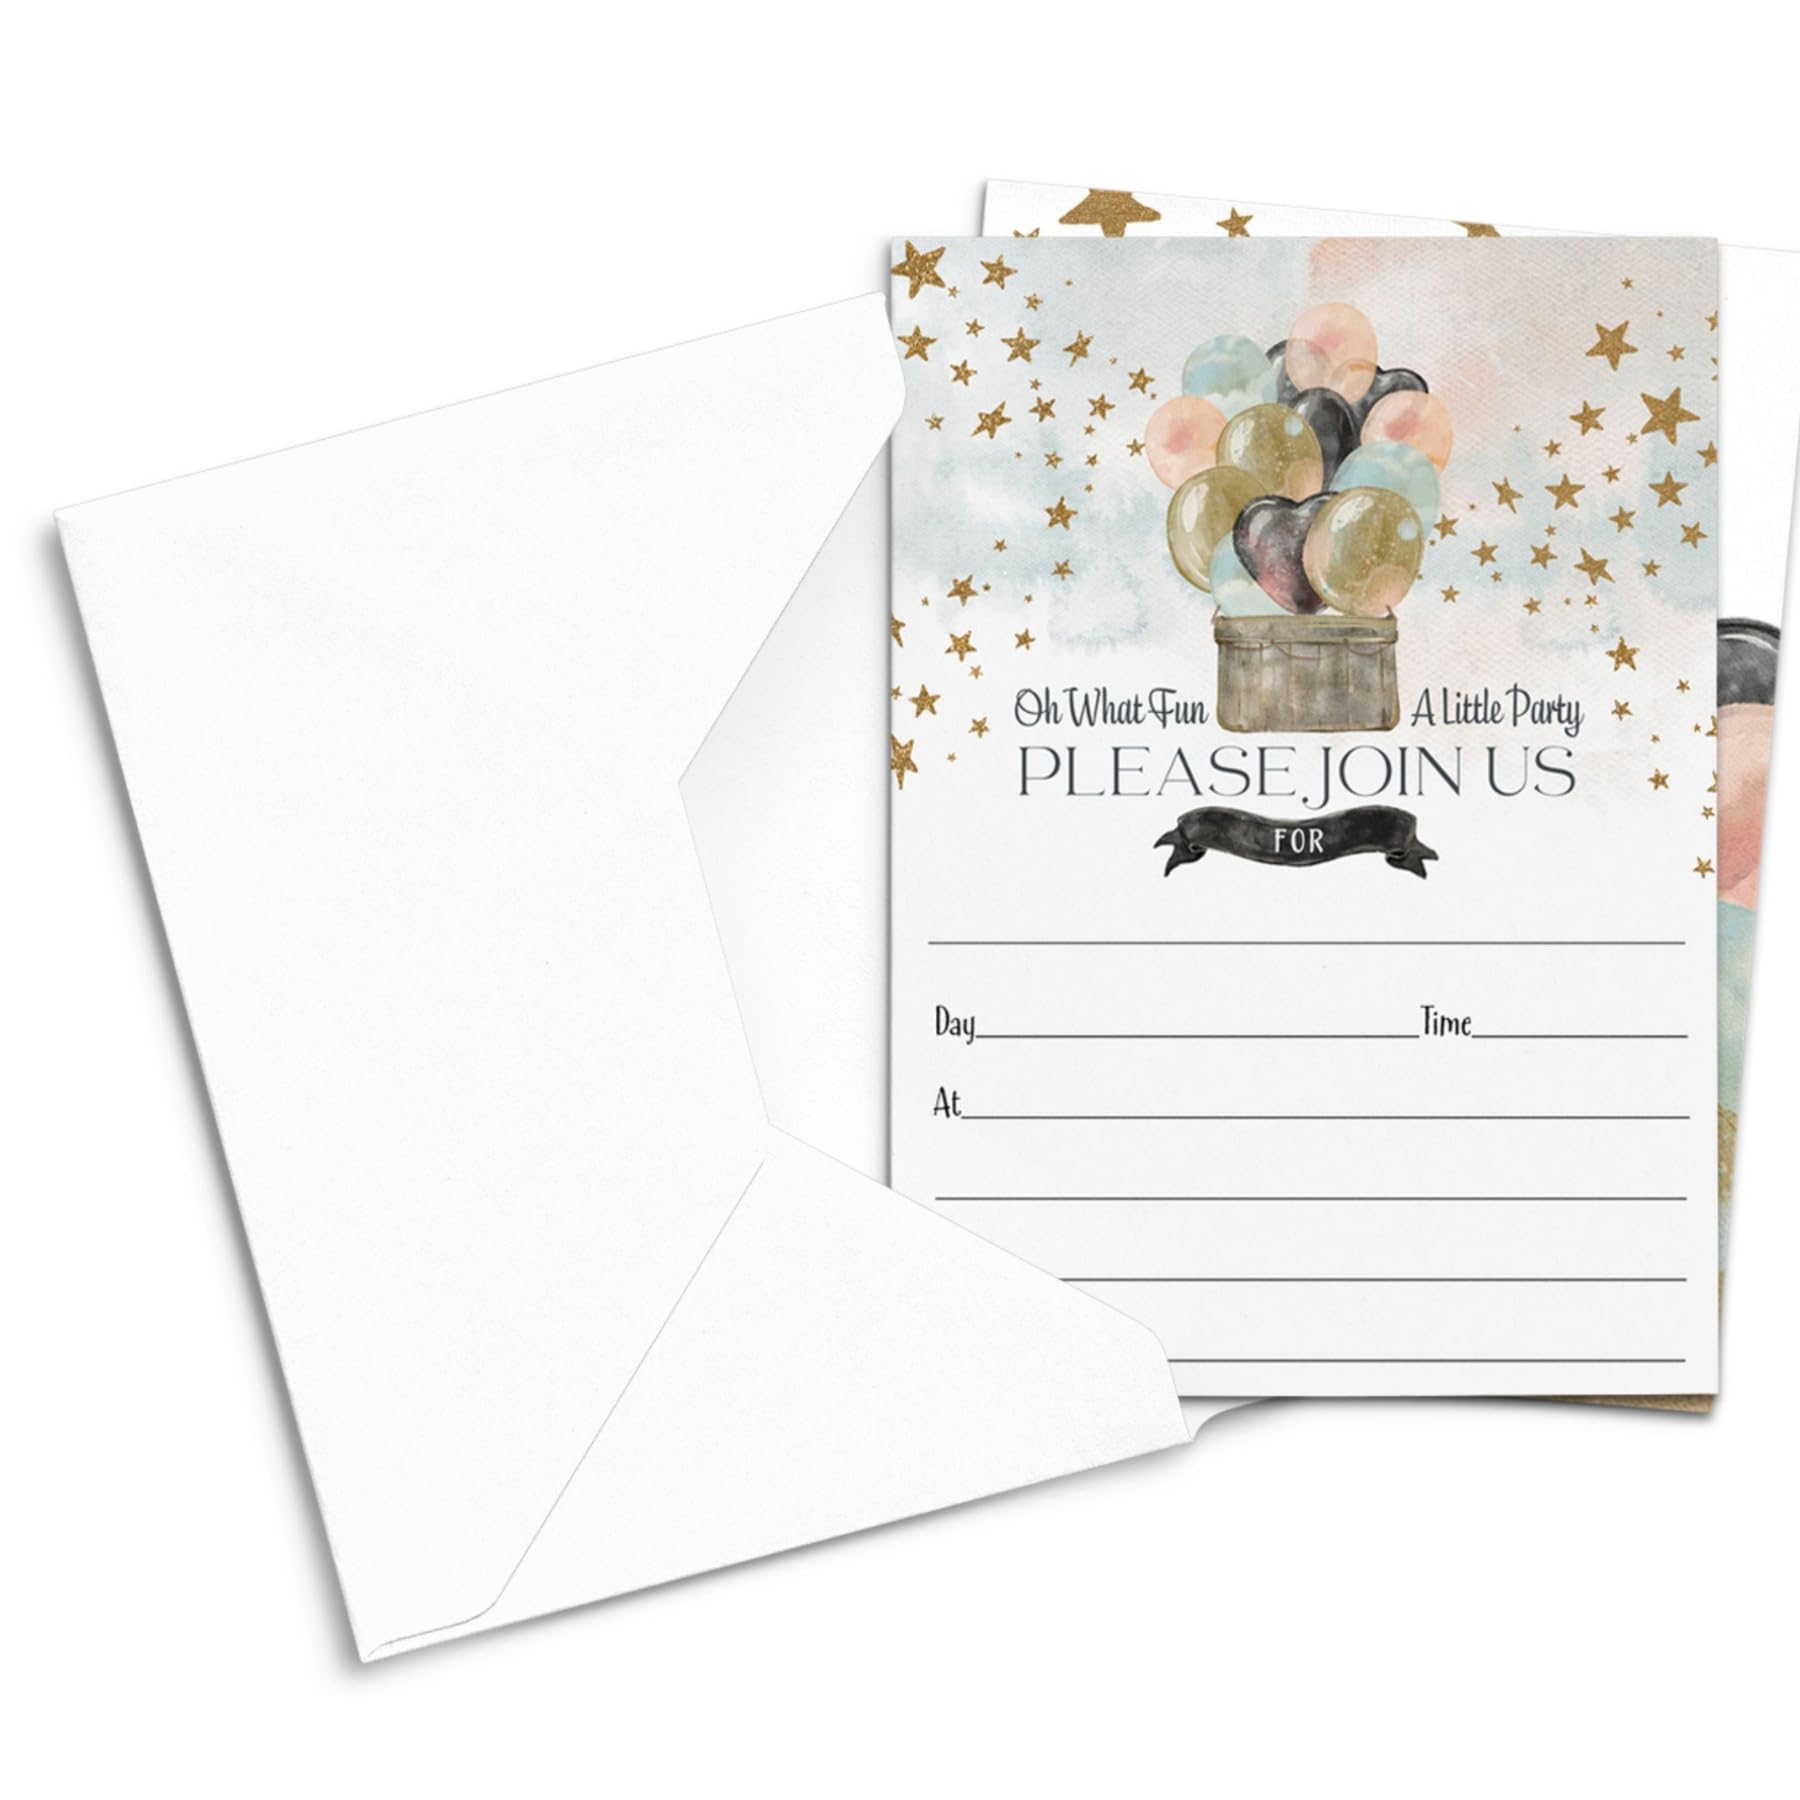 Showers, Graduation, Reception, DIY 5x7 Blank Cards, 25 CountPaper Clever Party